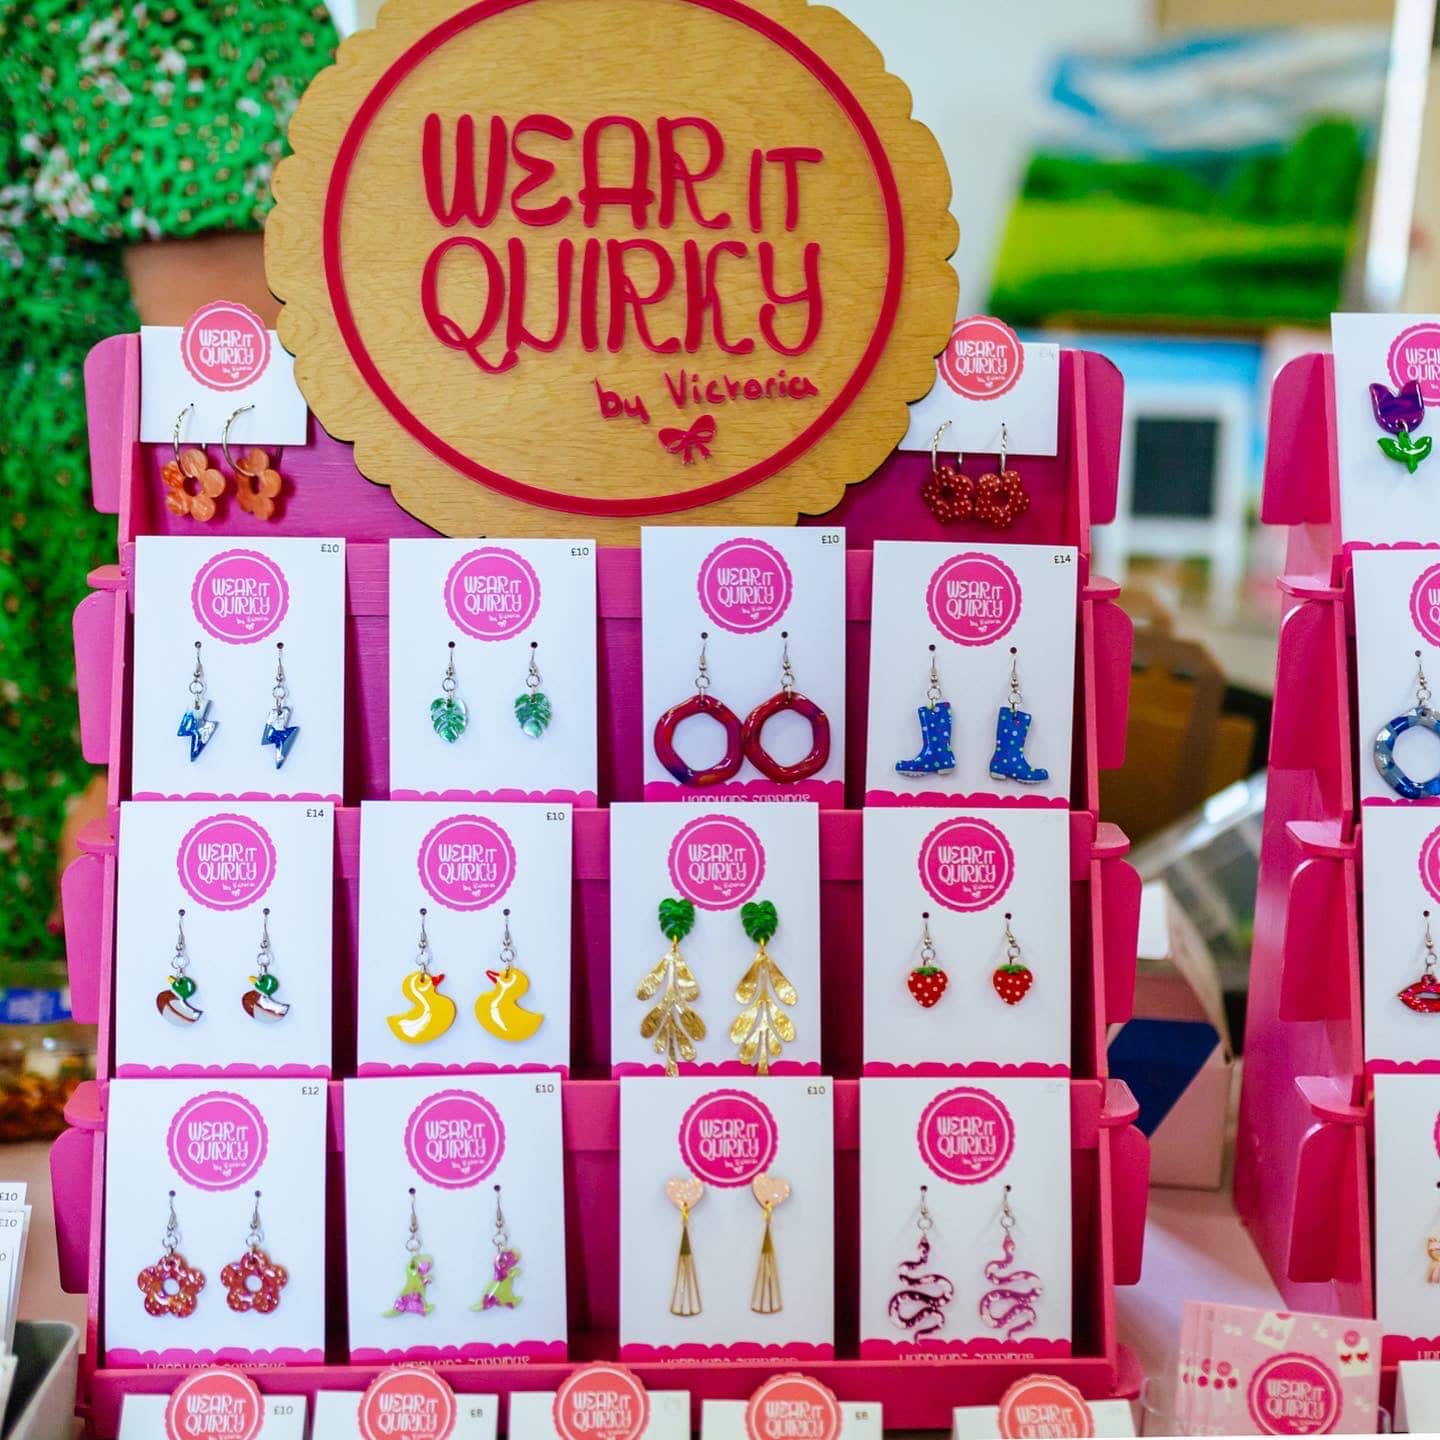 Wear It Quirky All Collection Photo